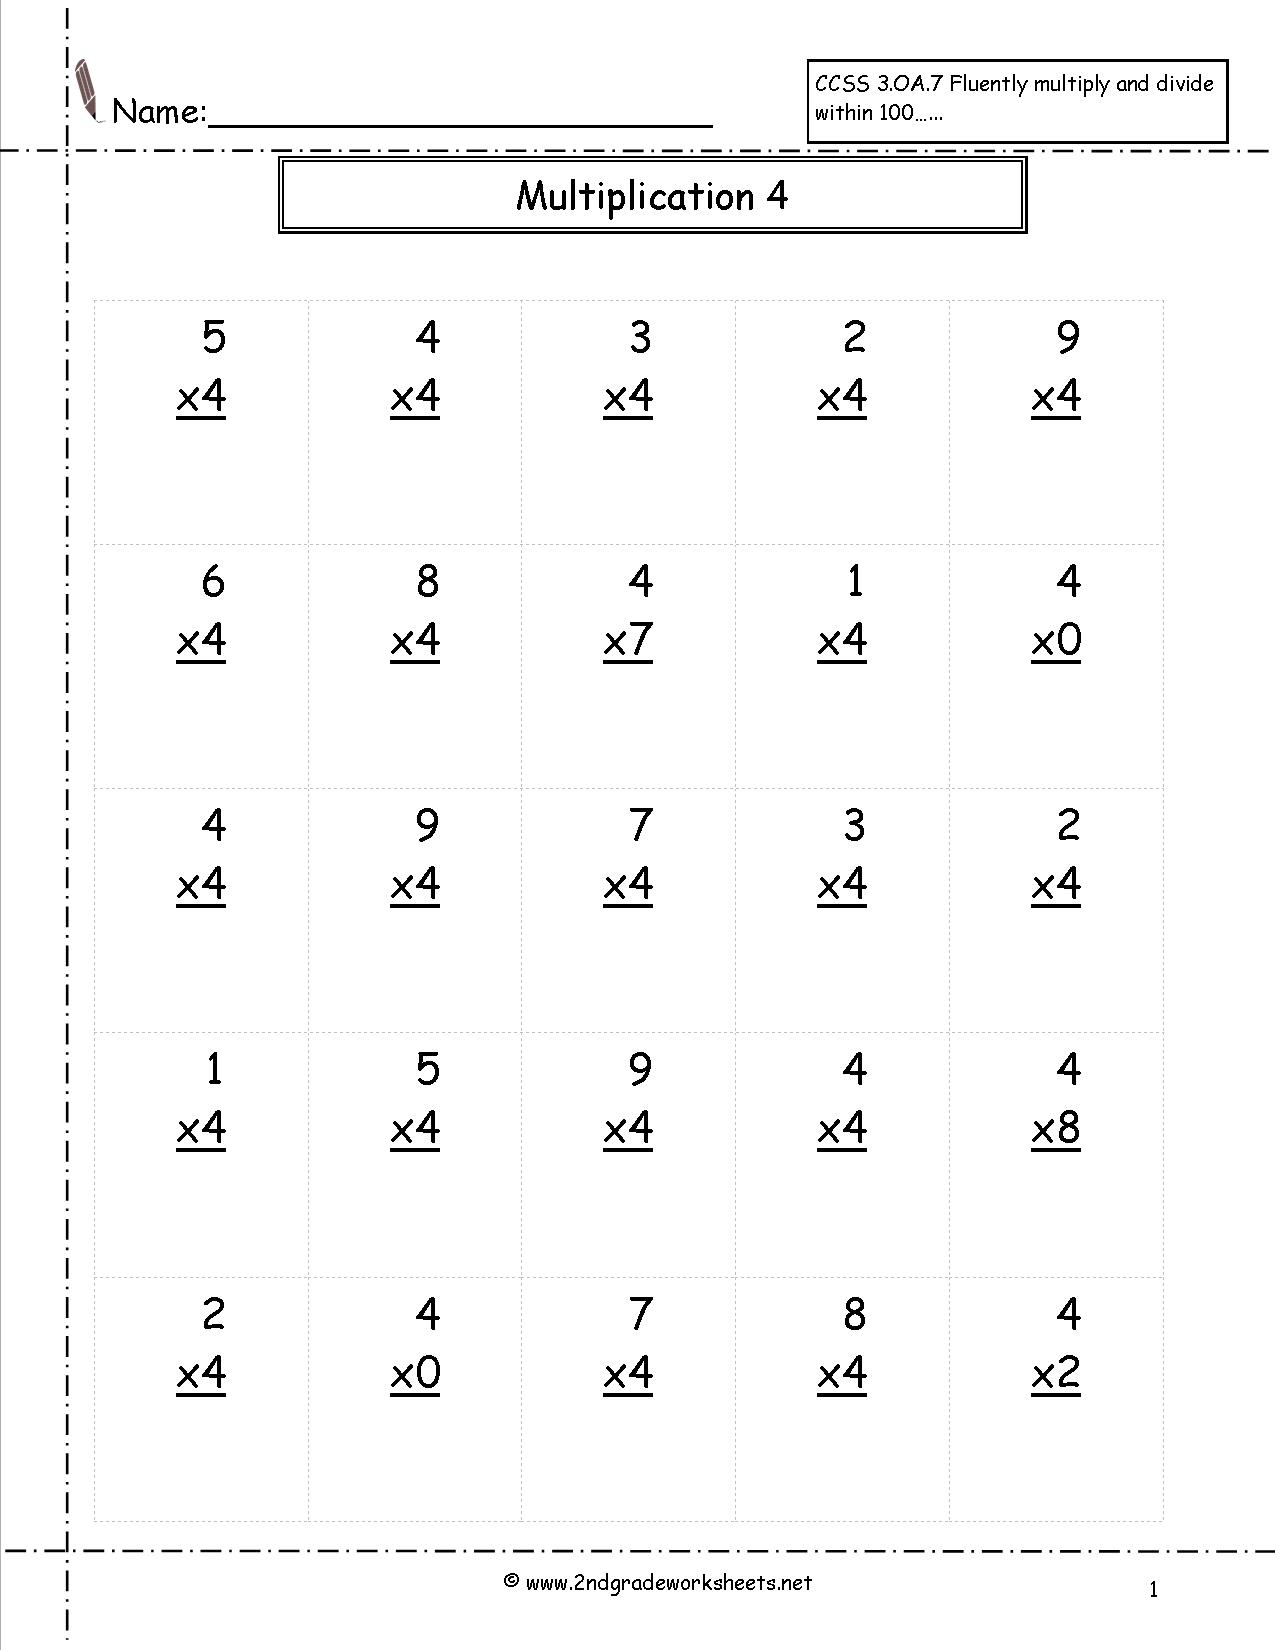 Multiplication Worksheets And Printouts | Printable Multiplication Worksheets